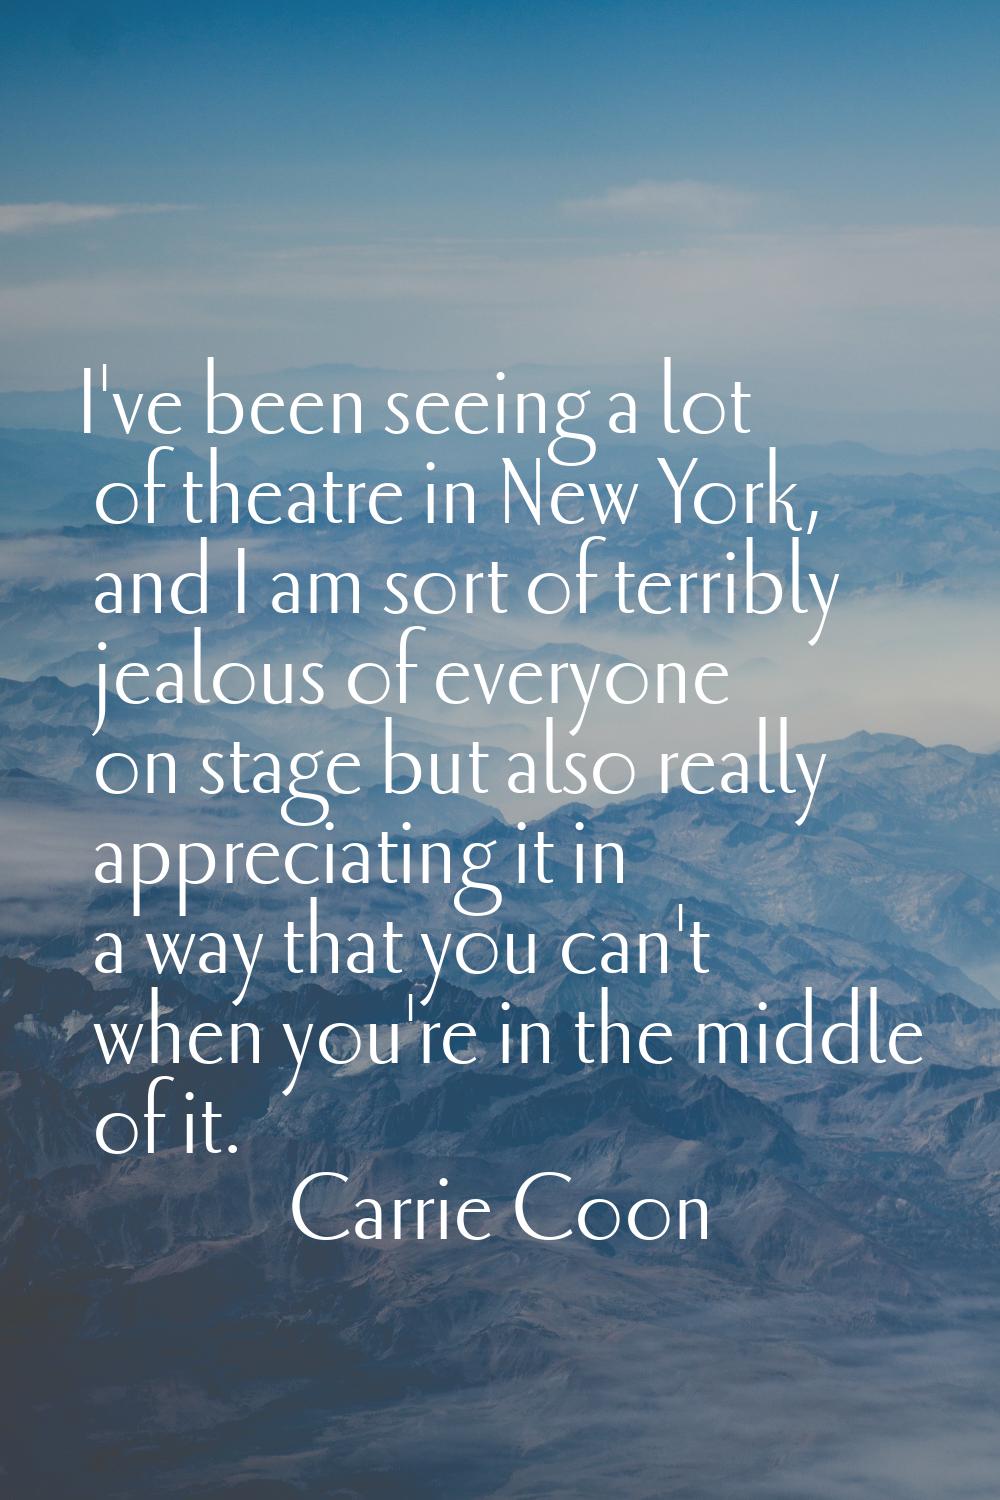 I've been seeing a lot of theatre in New York, and I am sort of terribly jealous of everyone on sta